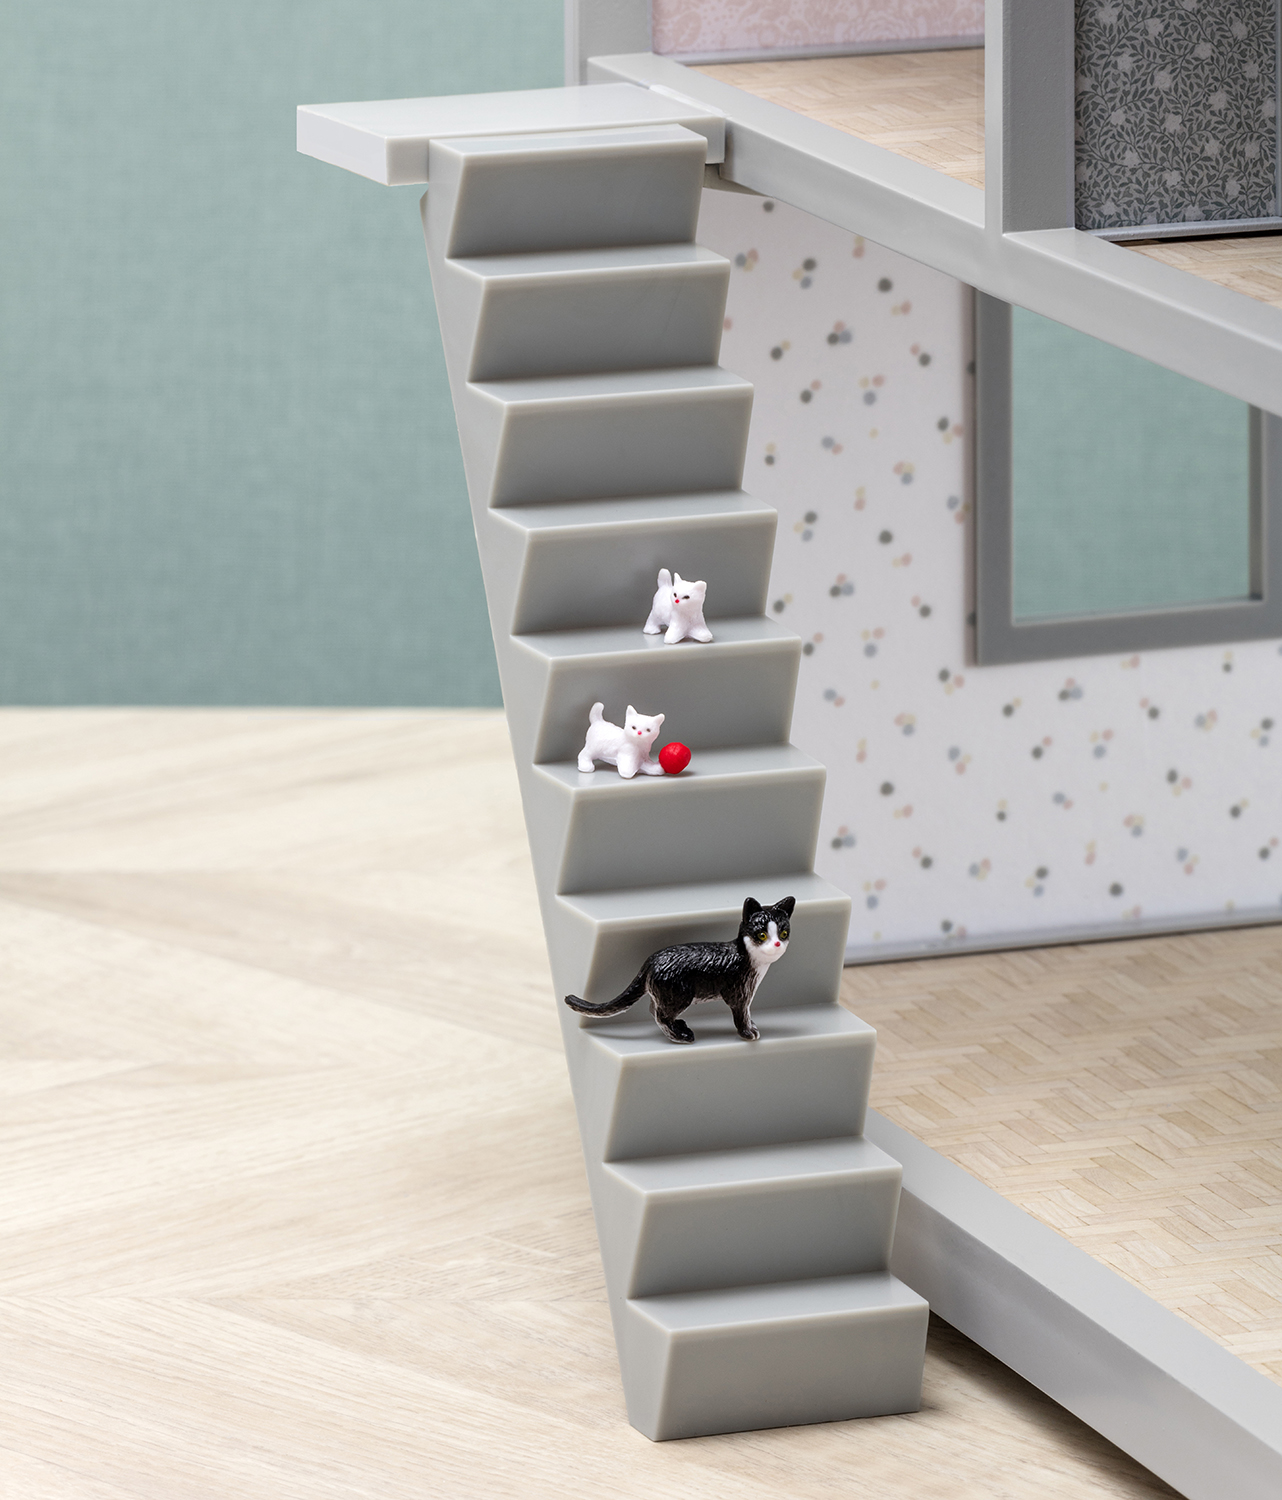 Doll house furniture & doll house accessories lundby doll house staircase